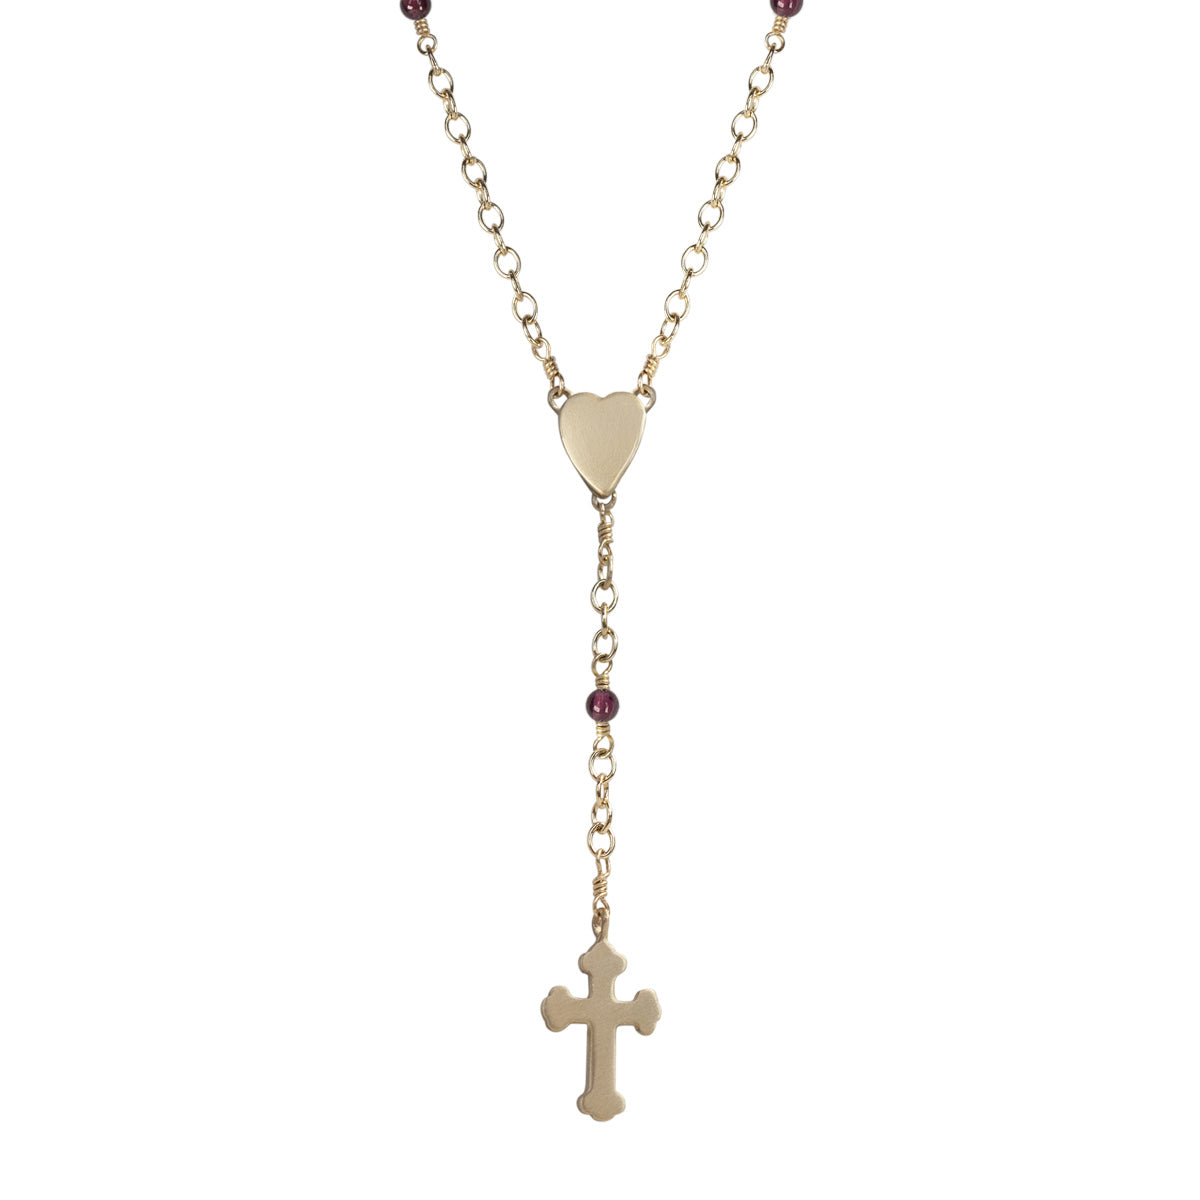 10K Gold Heart and Cross Rosary Necklace on Garnet Chain